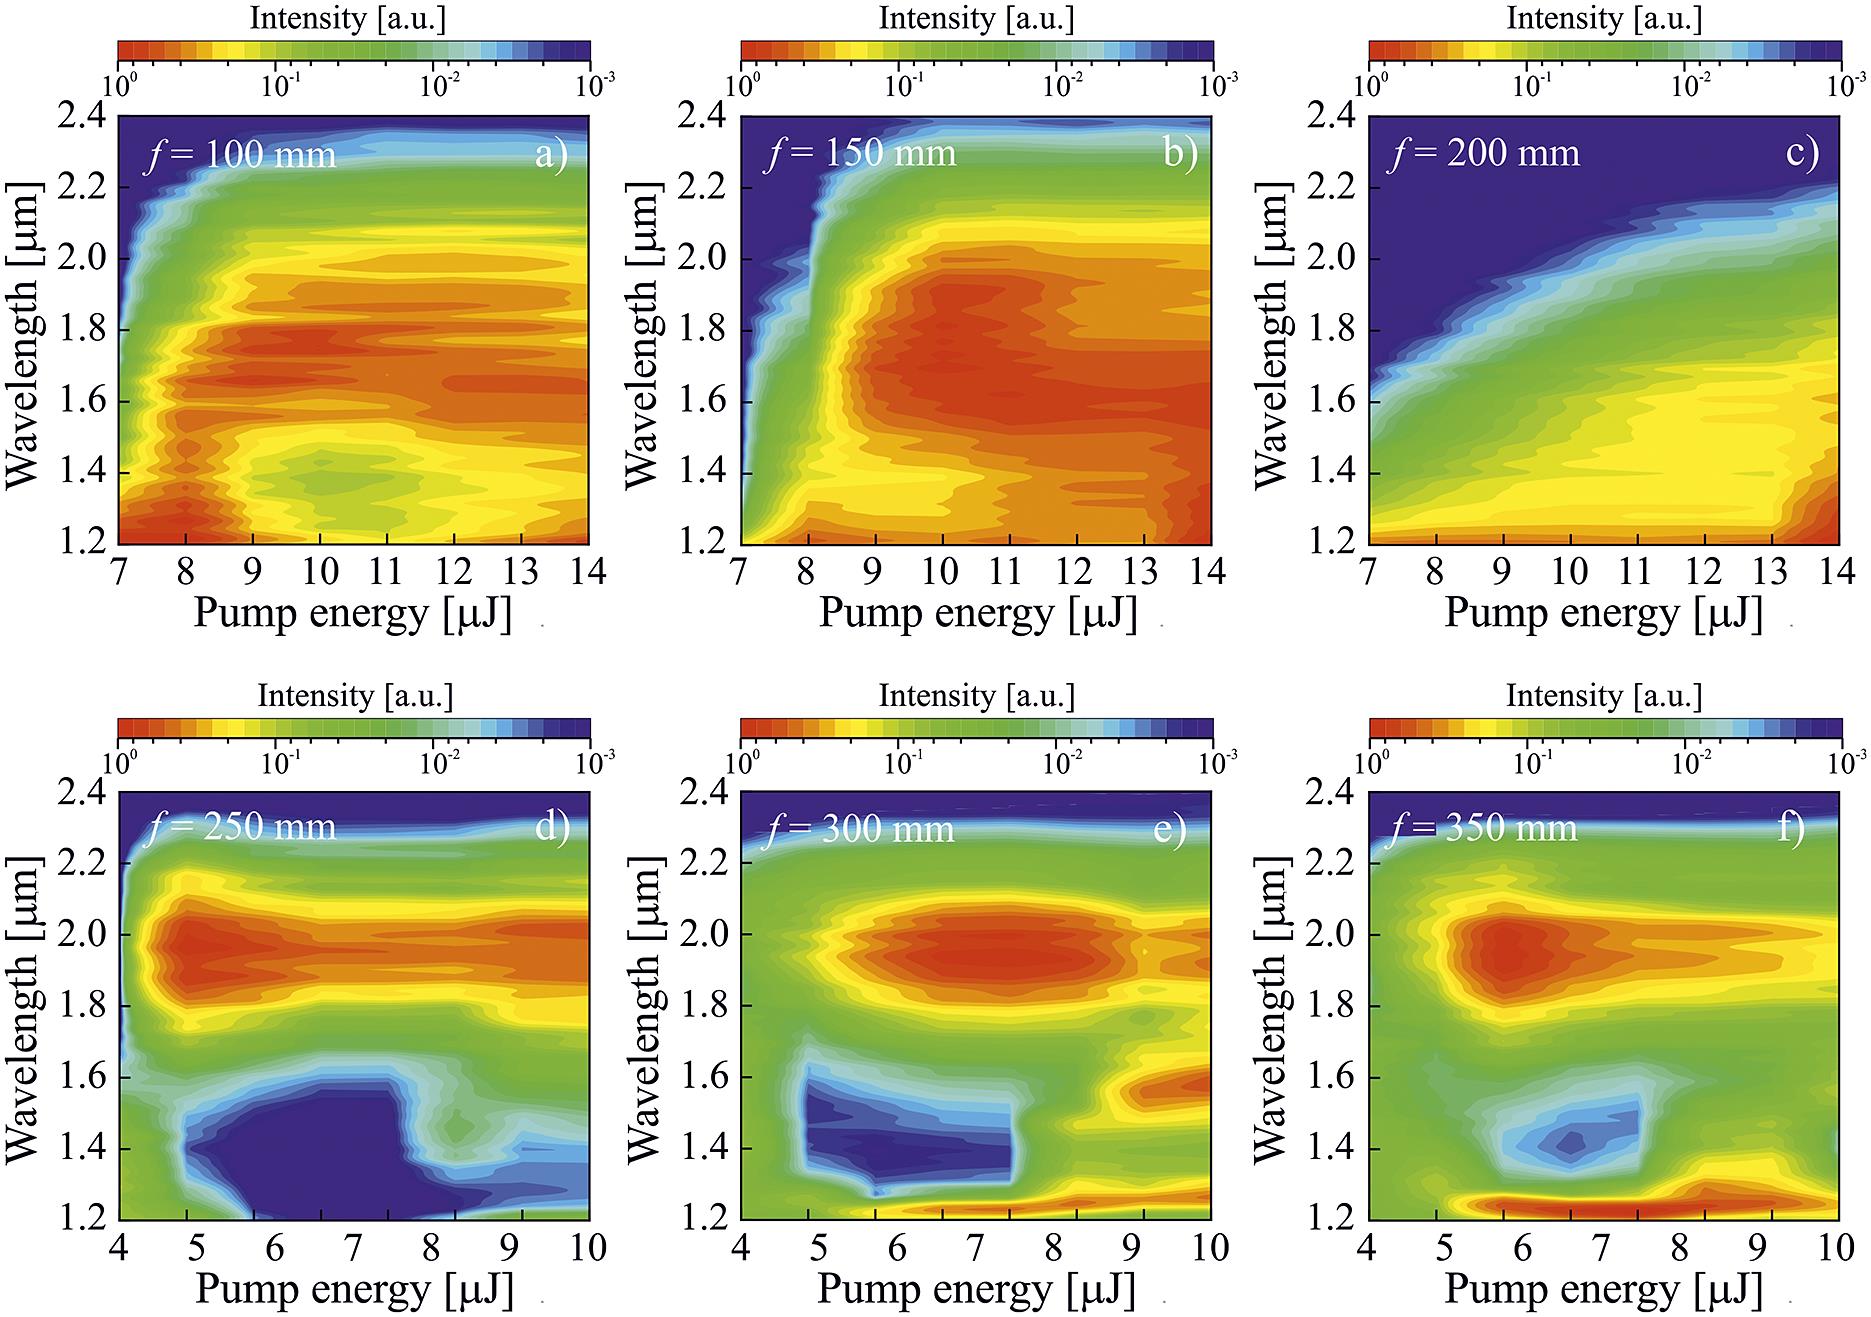 Dependence of the intensity of the SC spectrum envelope on the pump pulse energy at different focal lengths for YAG crystals 15 mm (a)–(c) and 130 mm (d)–(f).